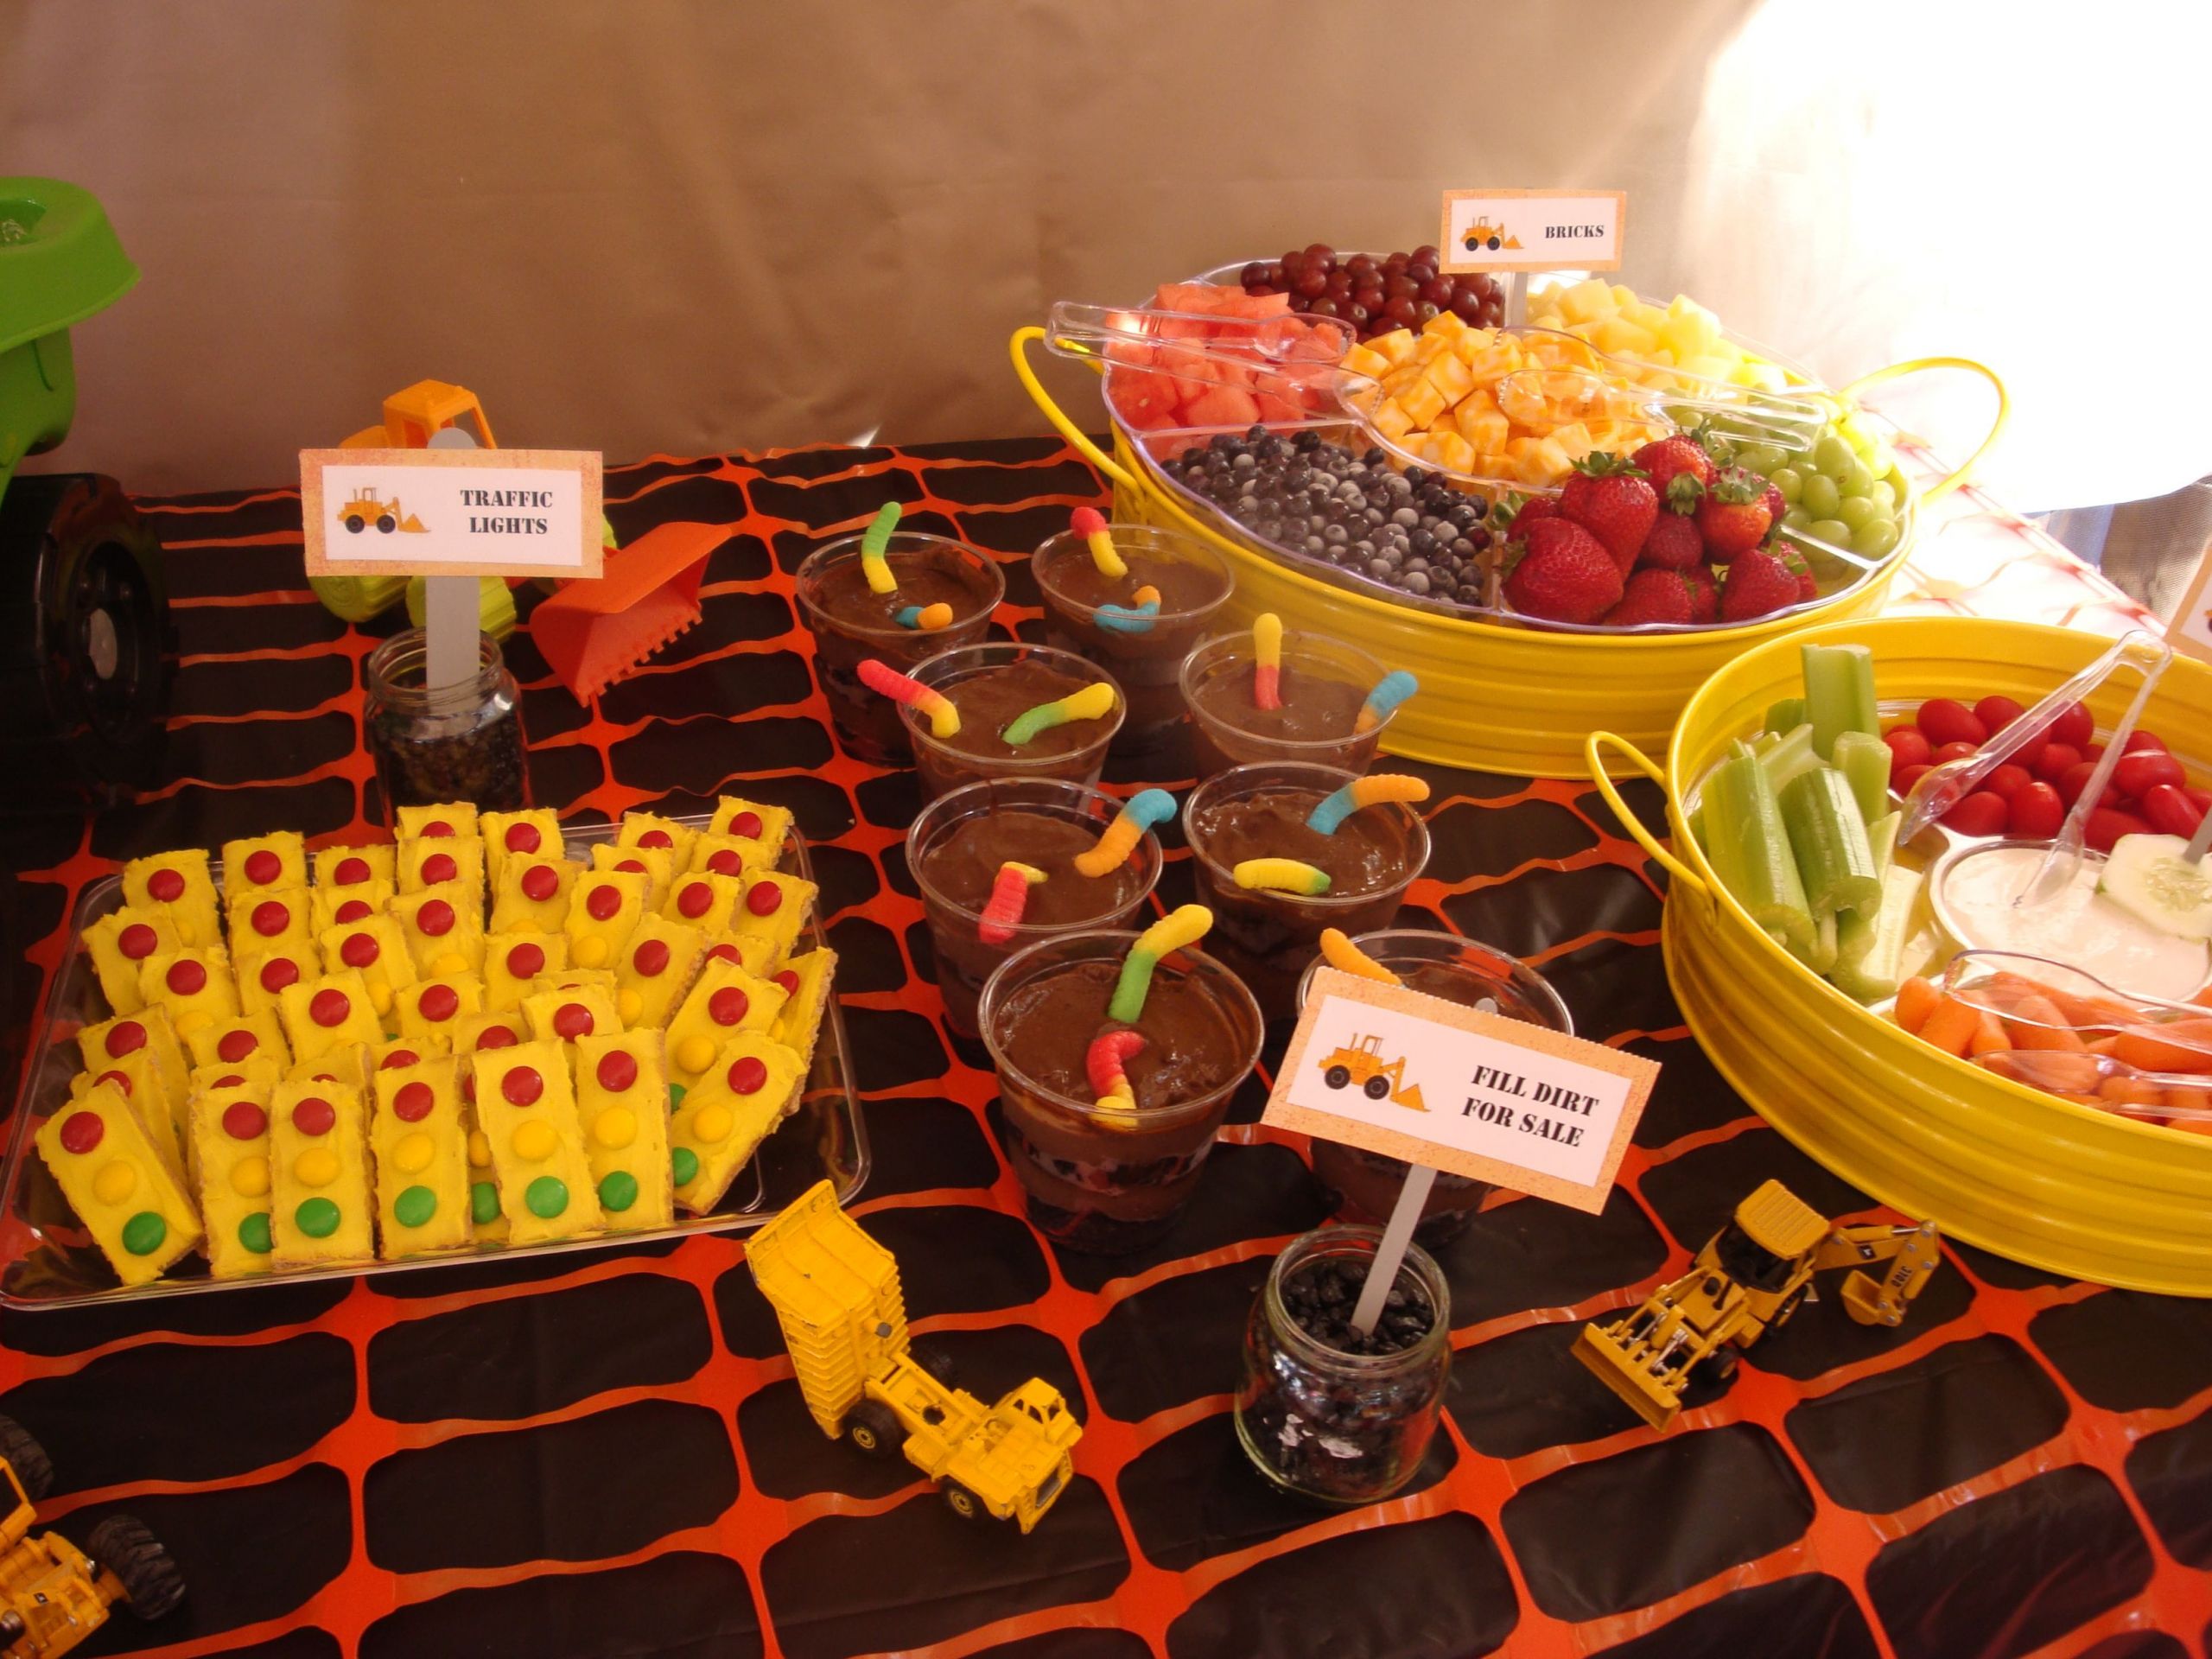 Construction Themed Birthday Party Food Ideas
 Pin by Charlie Perrell on Partayy Ideas